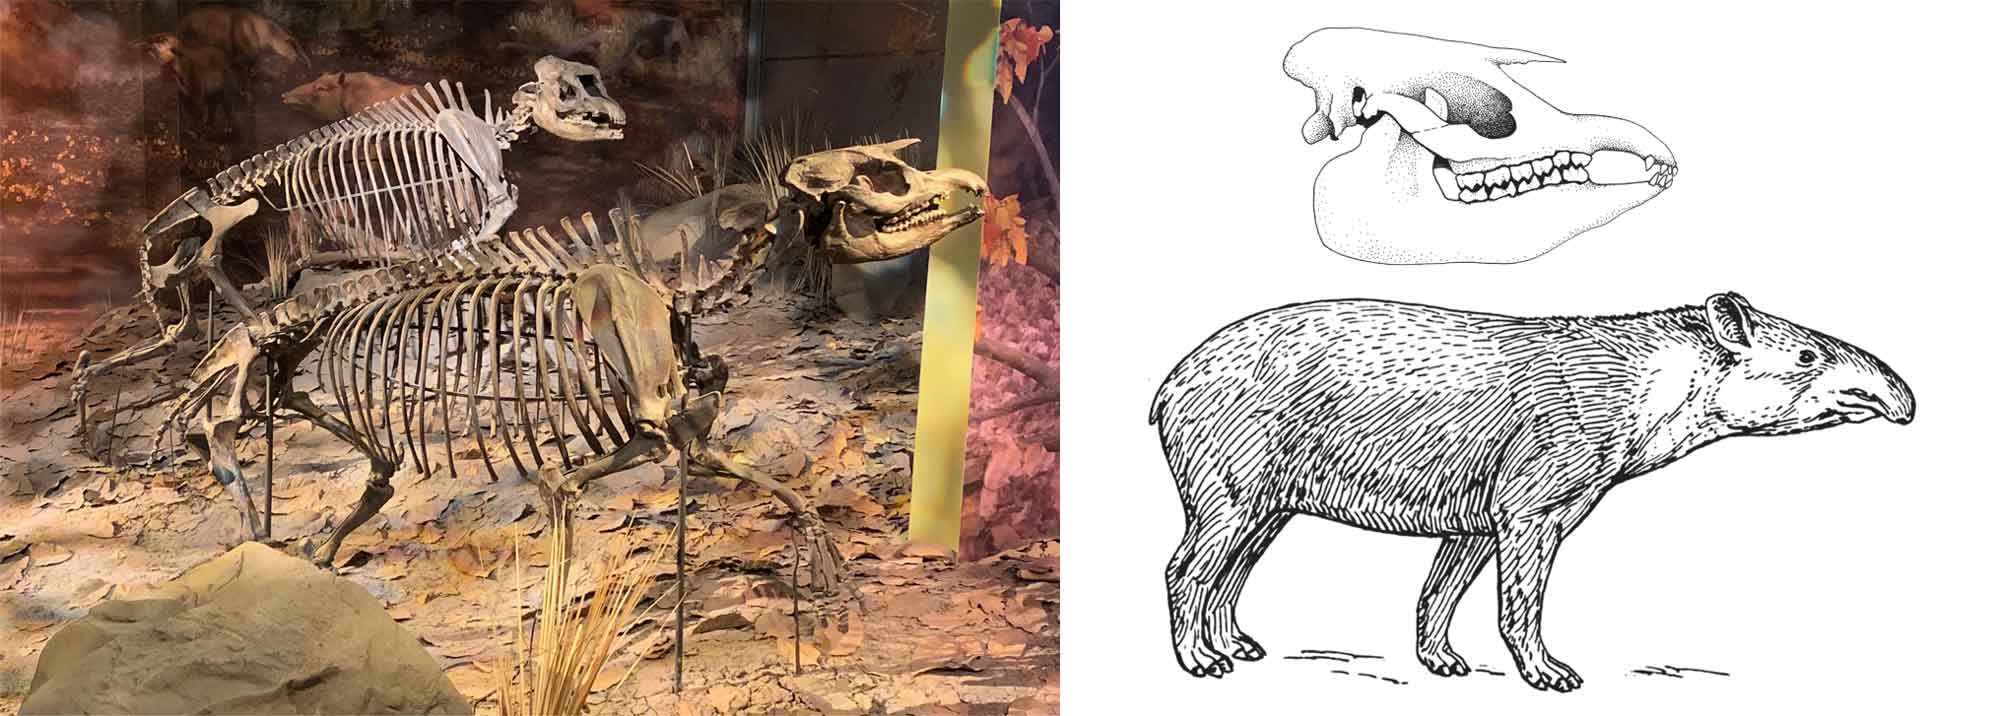 2-Panel figure of Gray Fossil Site tapirs. Panel 1. Photograph of tapir skeletons on display at Gray Fossil Site. Panel 2. Drawing showing a reconstruction of a living tapir underneath a tapir skull.